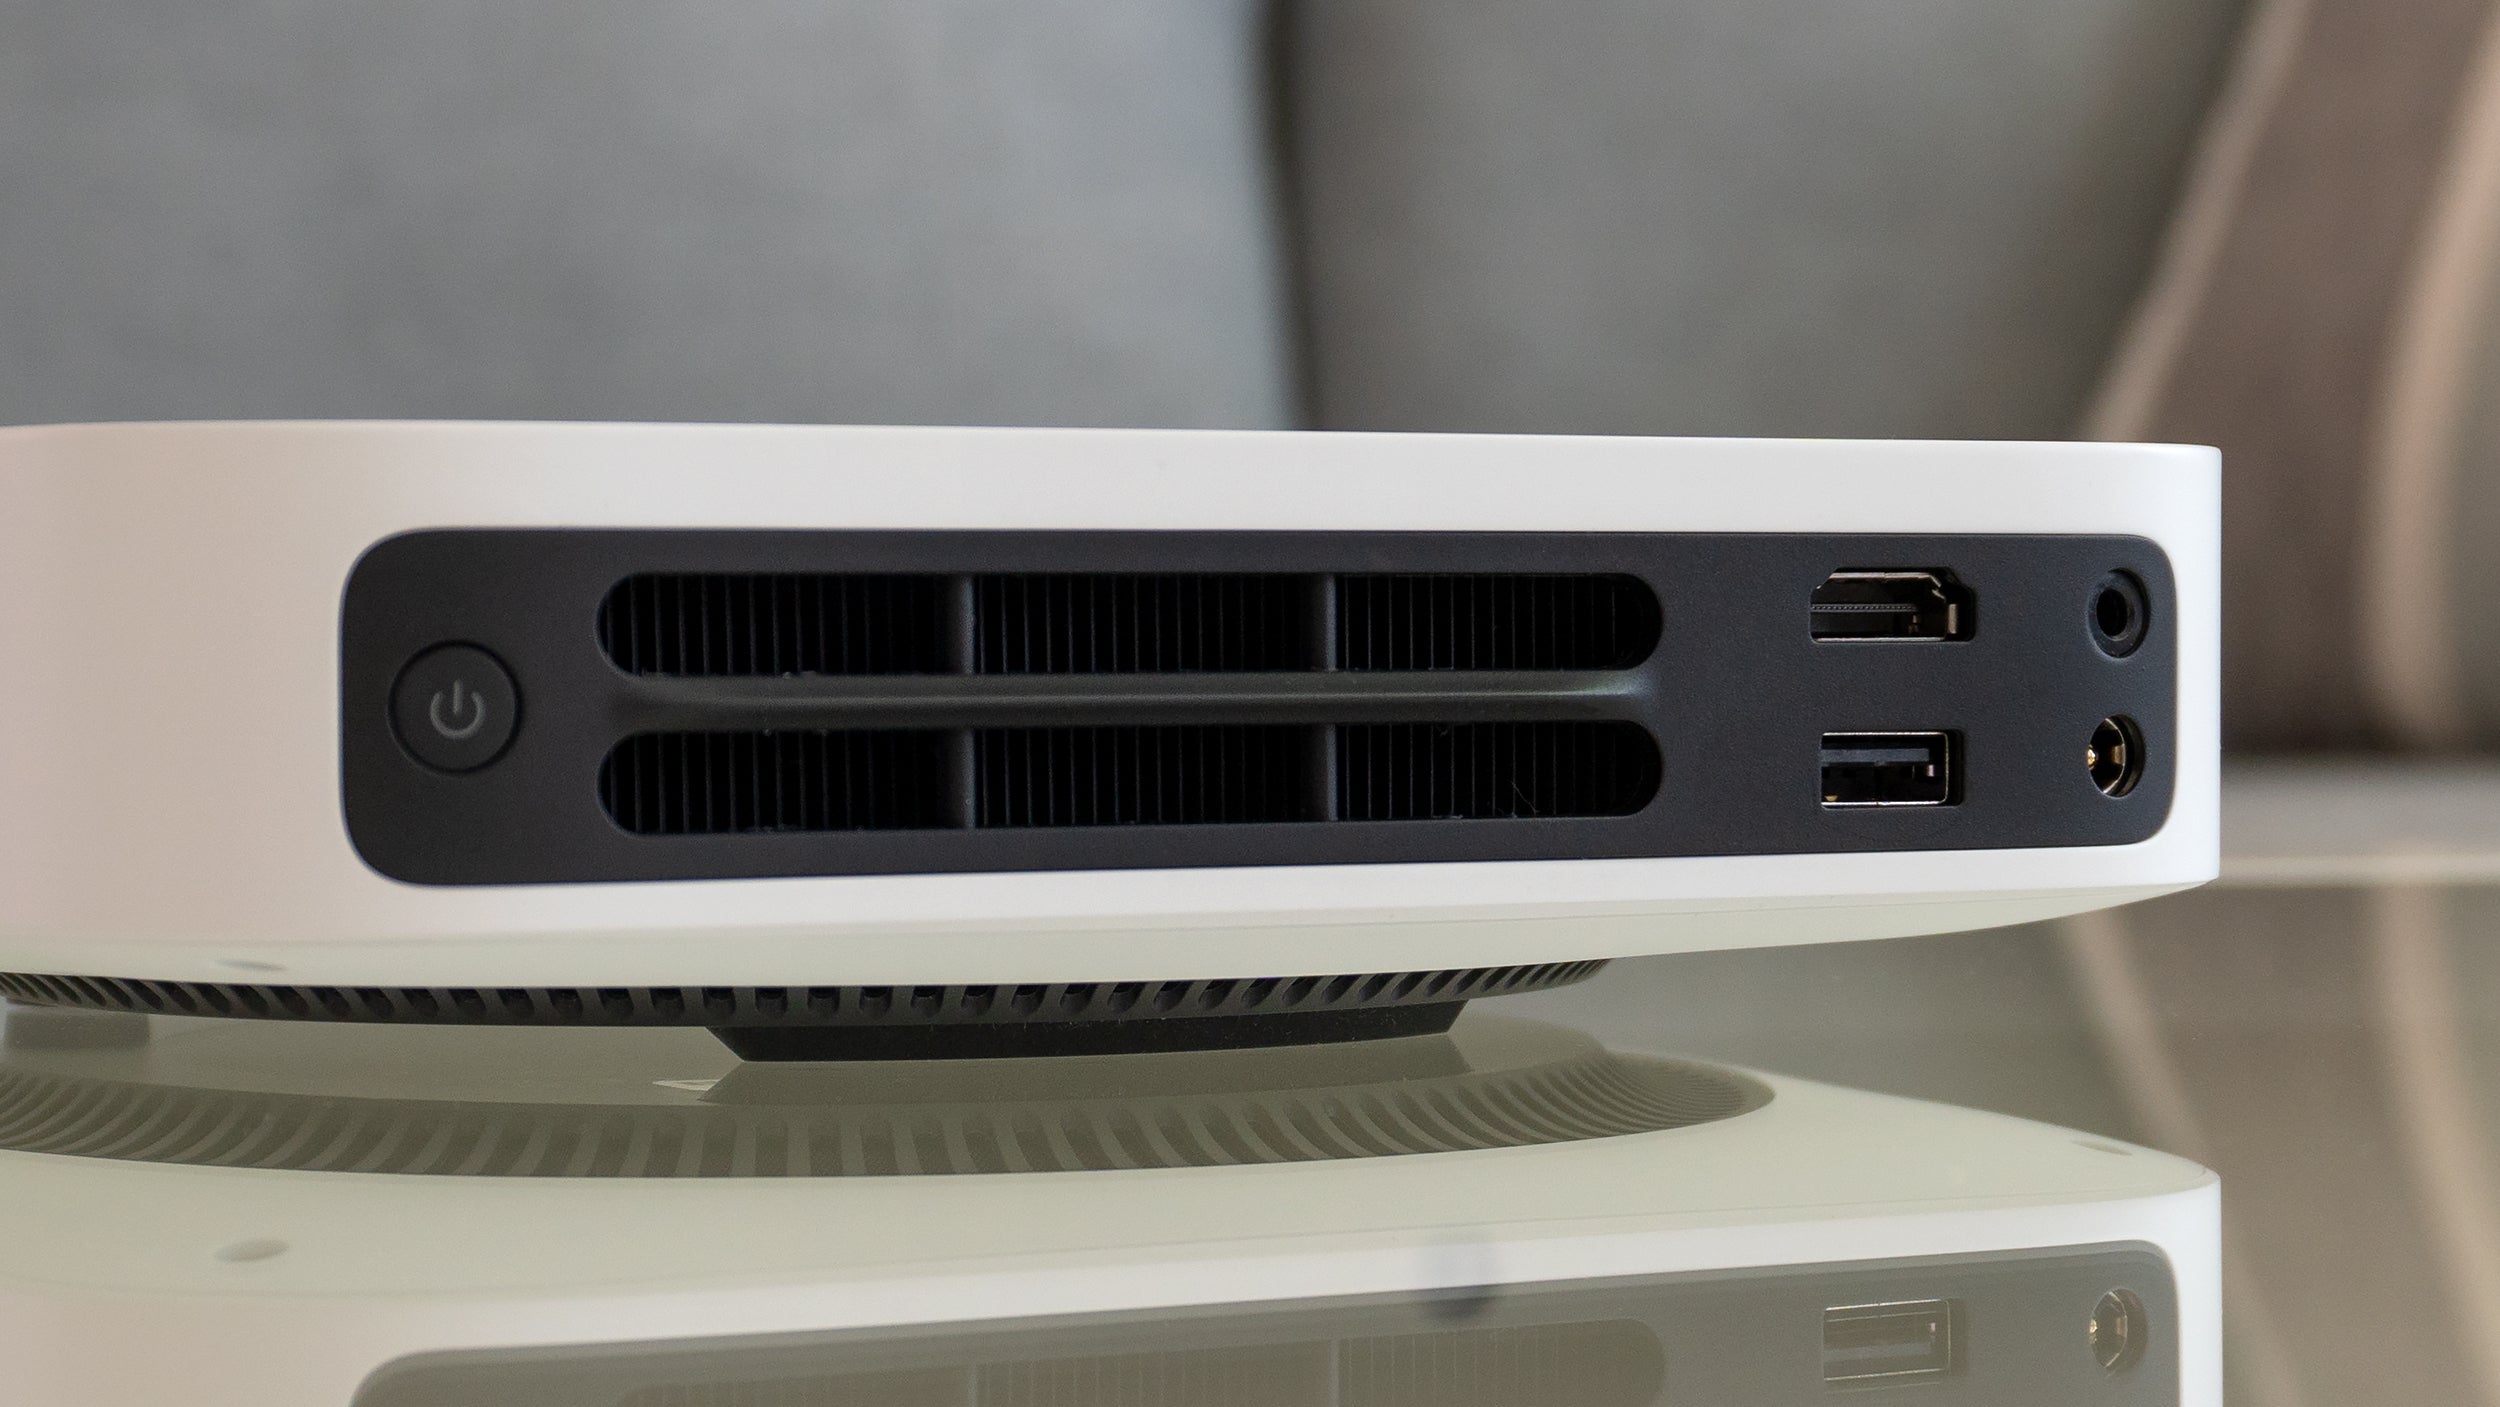 Connectivity is limited with the Elfin. On the back next to a cooling vent you'll only find a single HDMI port and a single USB port for playing media off an external drive, in addition to an audio connector and the power jack. (Photo: Andrew Liszewski - Gizmodo)